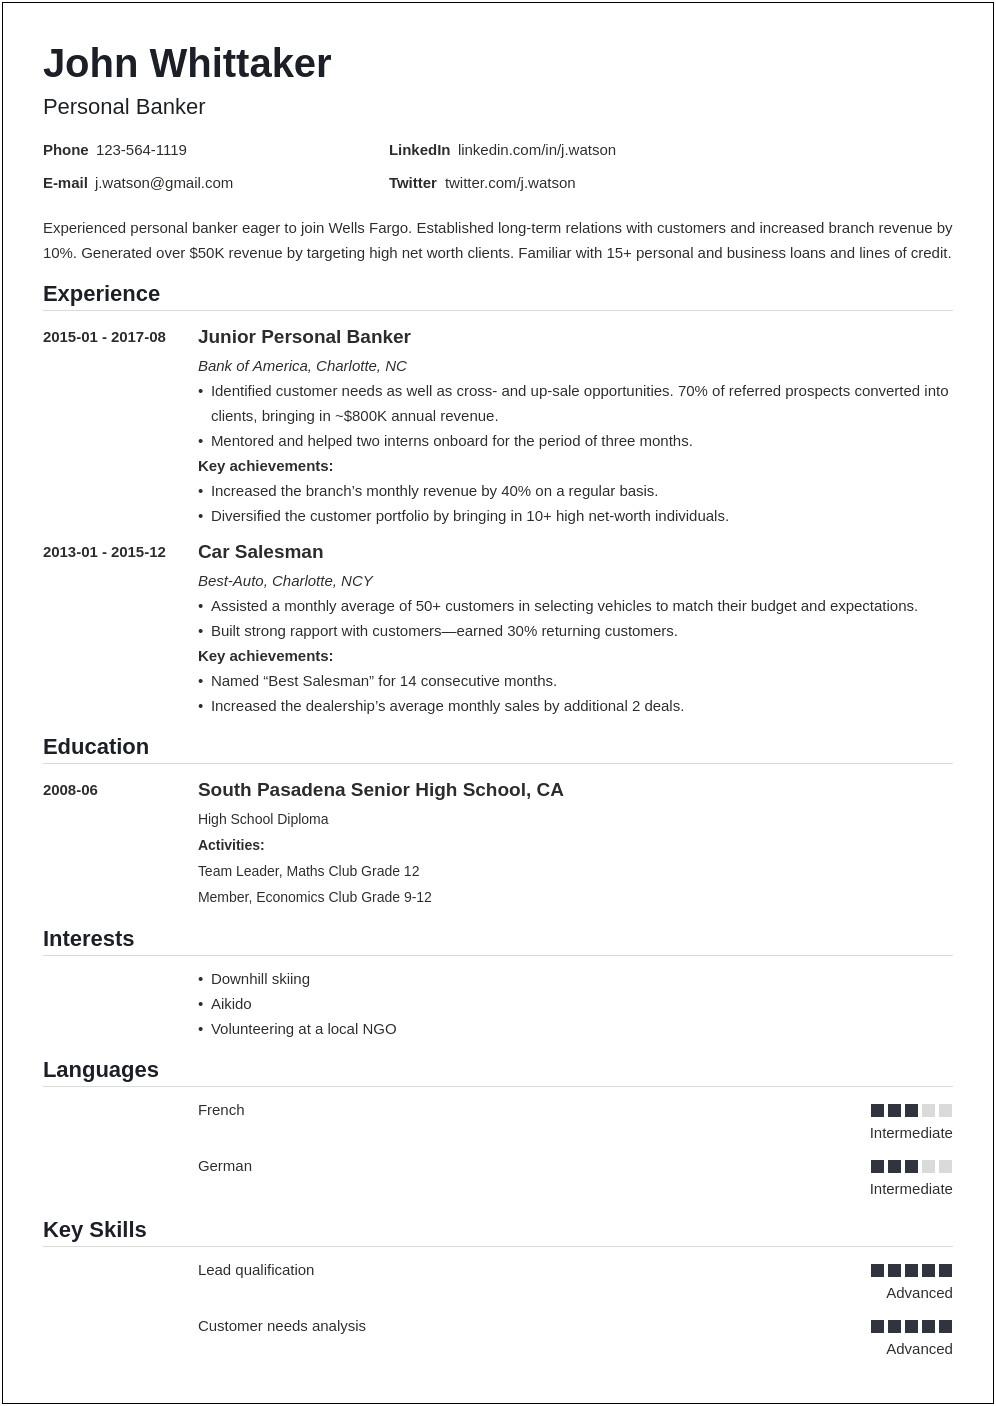 Resume Format For Private Bank Job